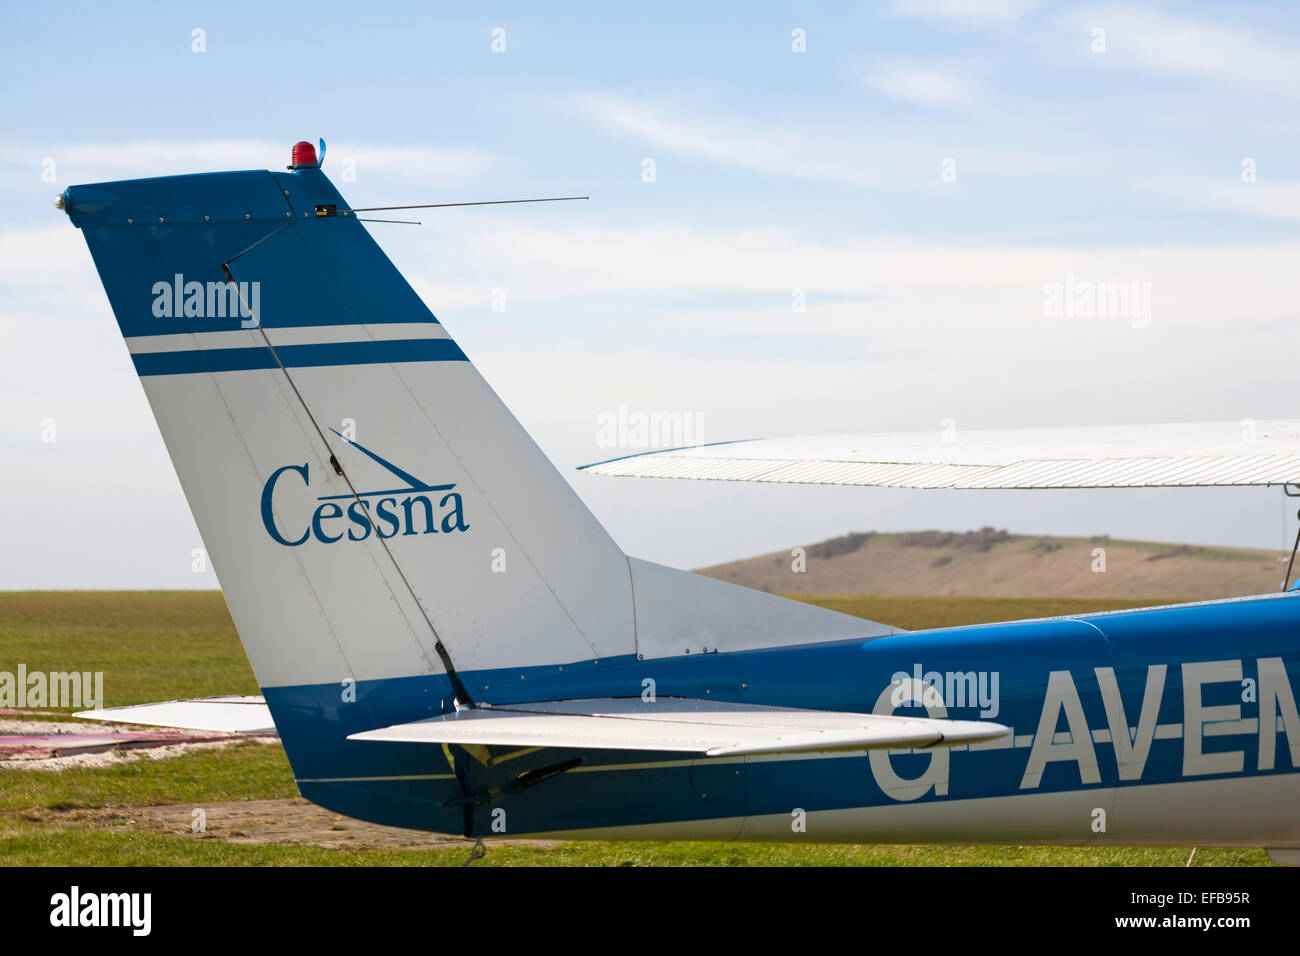 Cessna tail plane on light aircraft at Compton Abbas airfield, Dorset in March Stock Photo